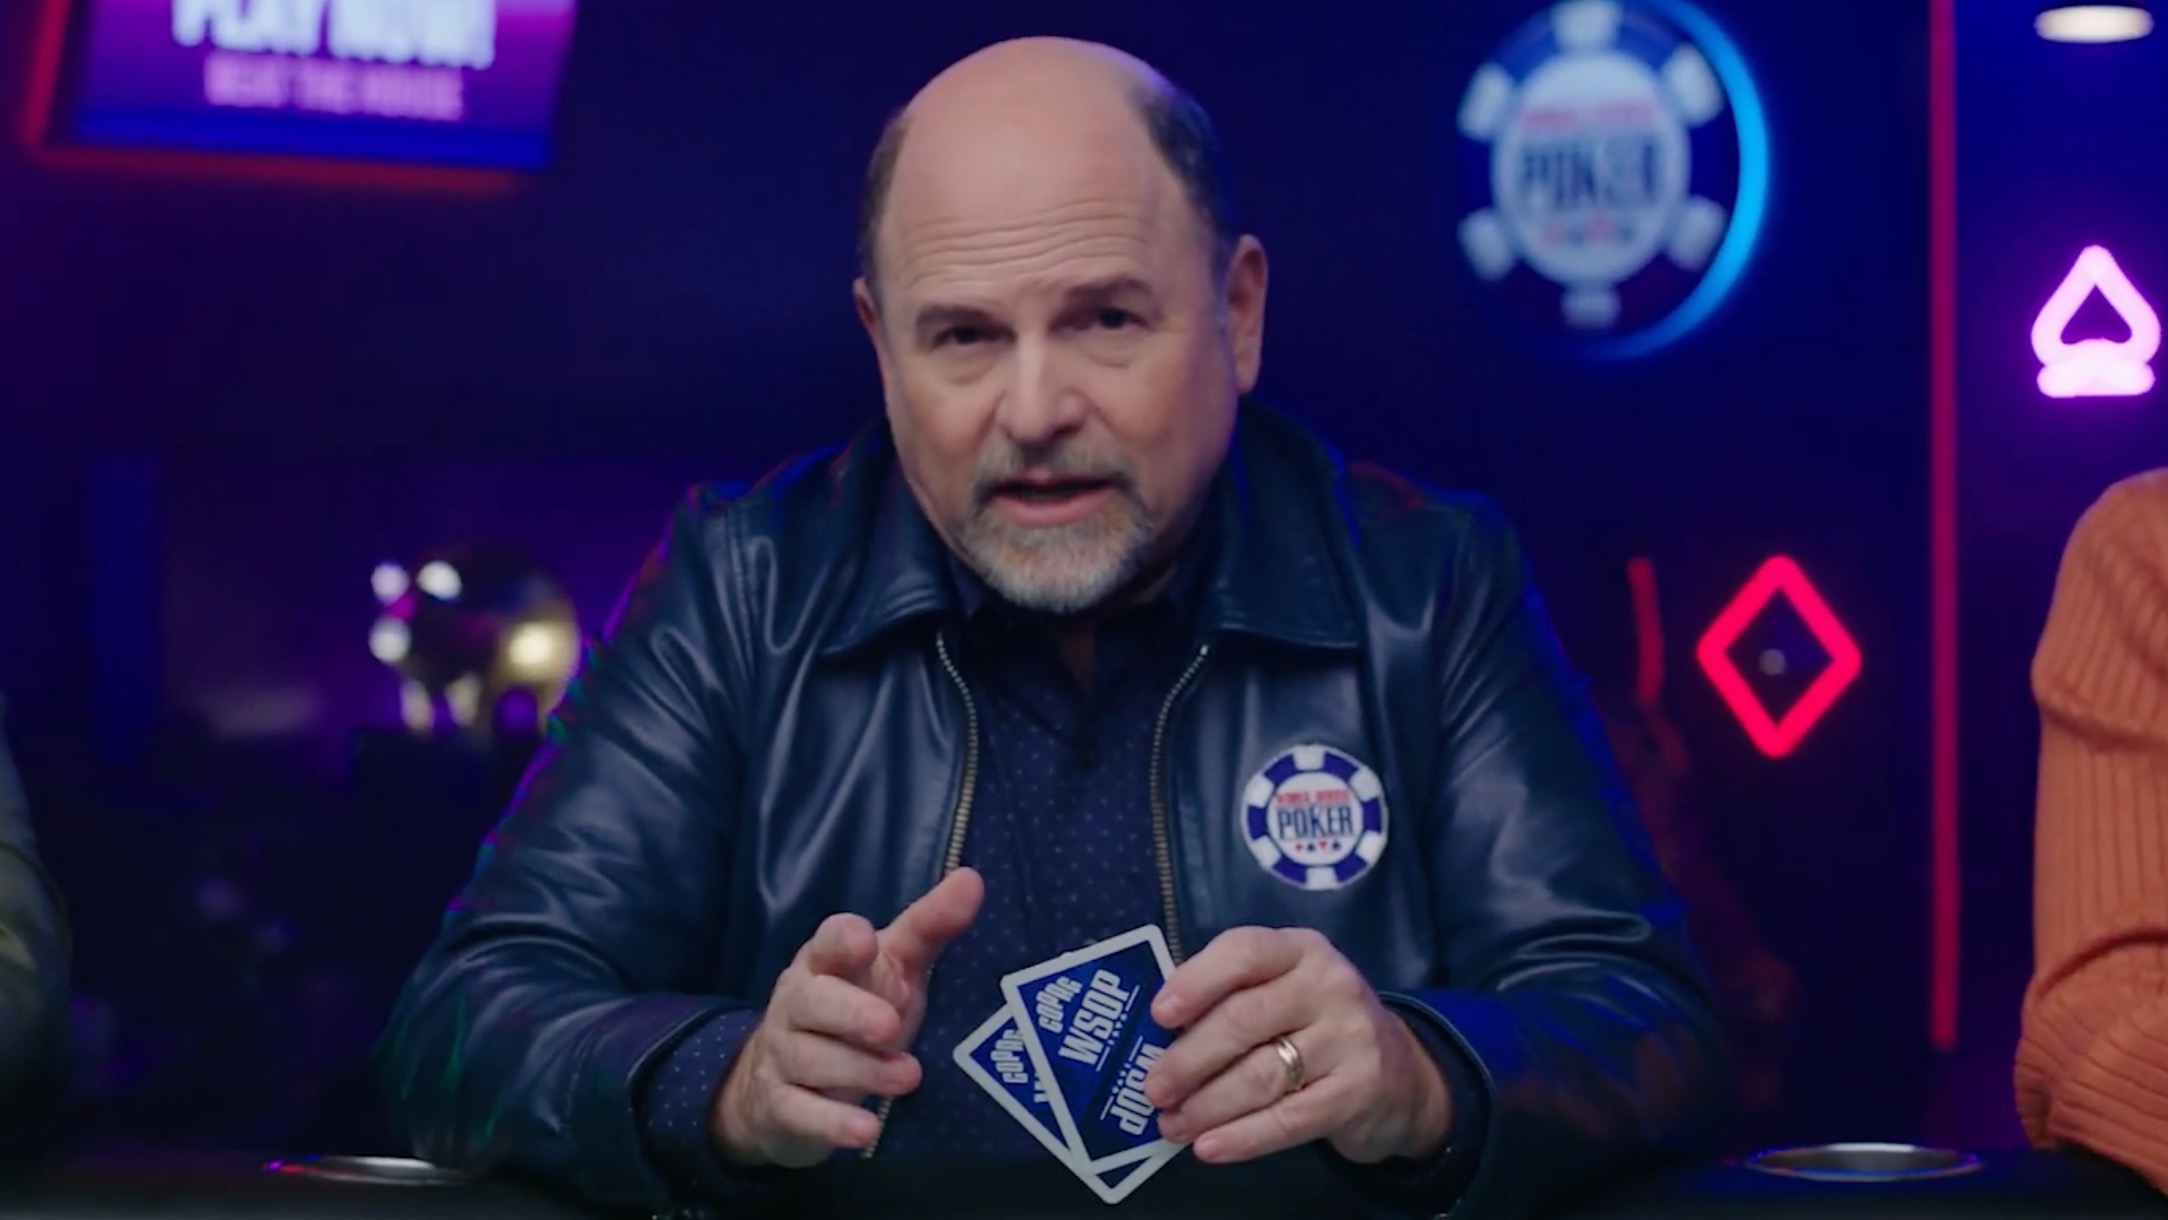 interview with Jason Alexander discussing poker